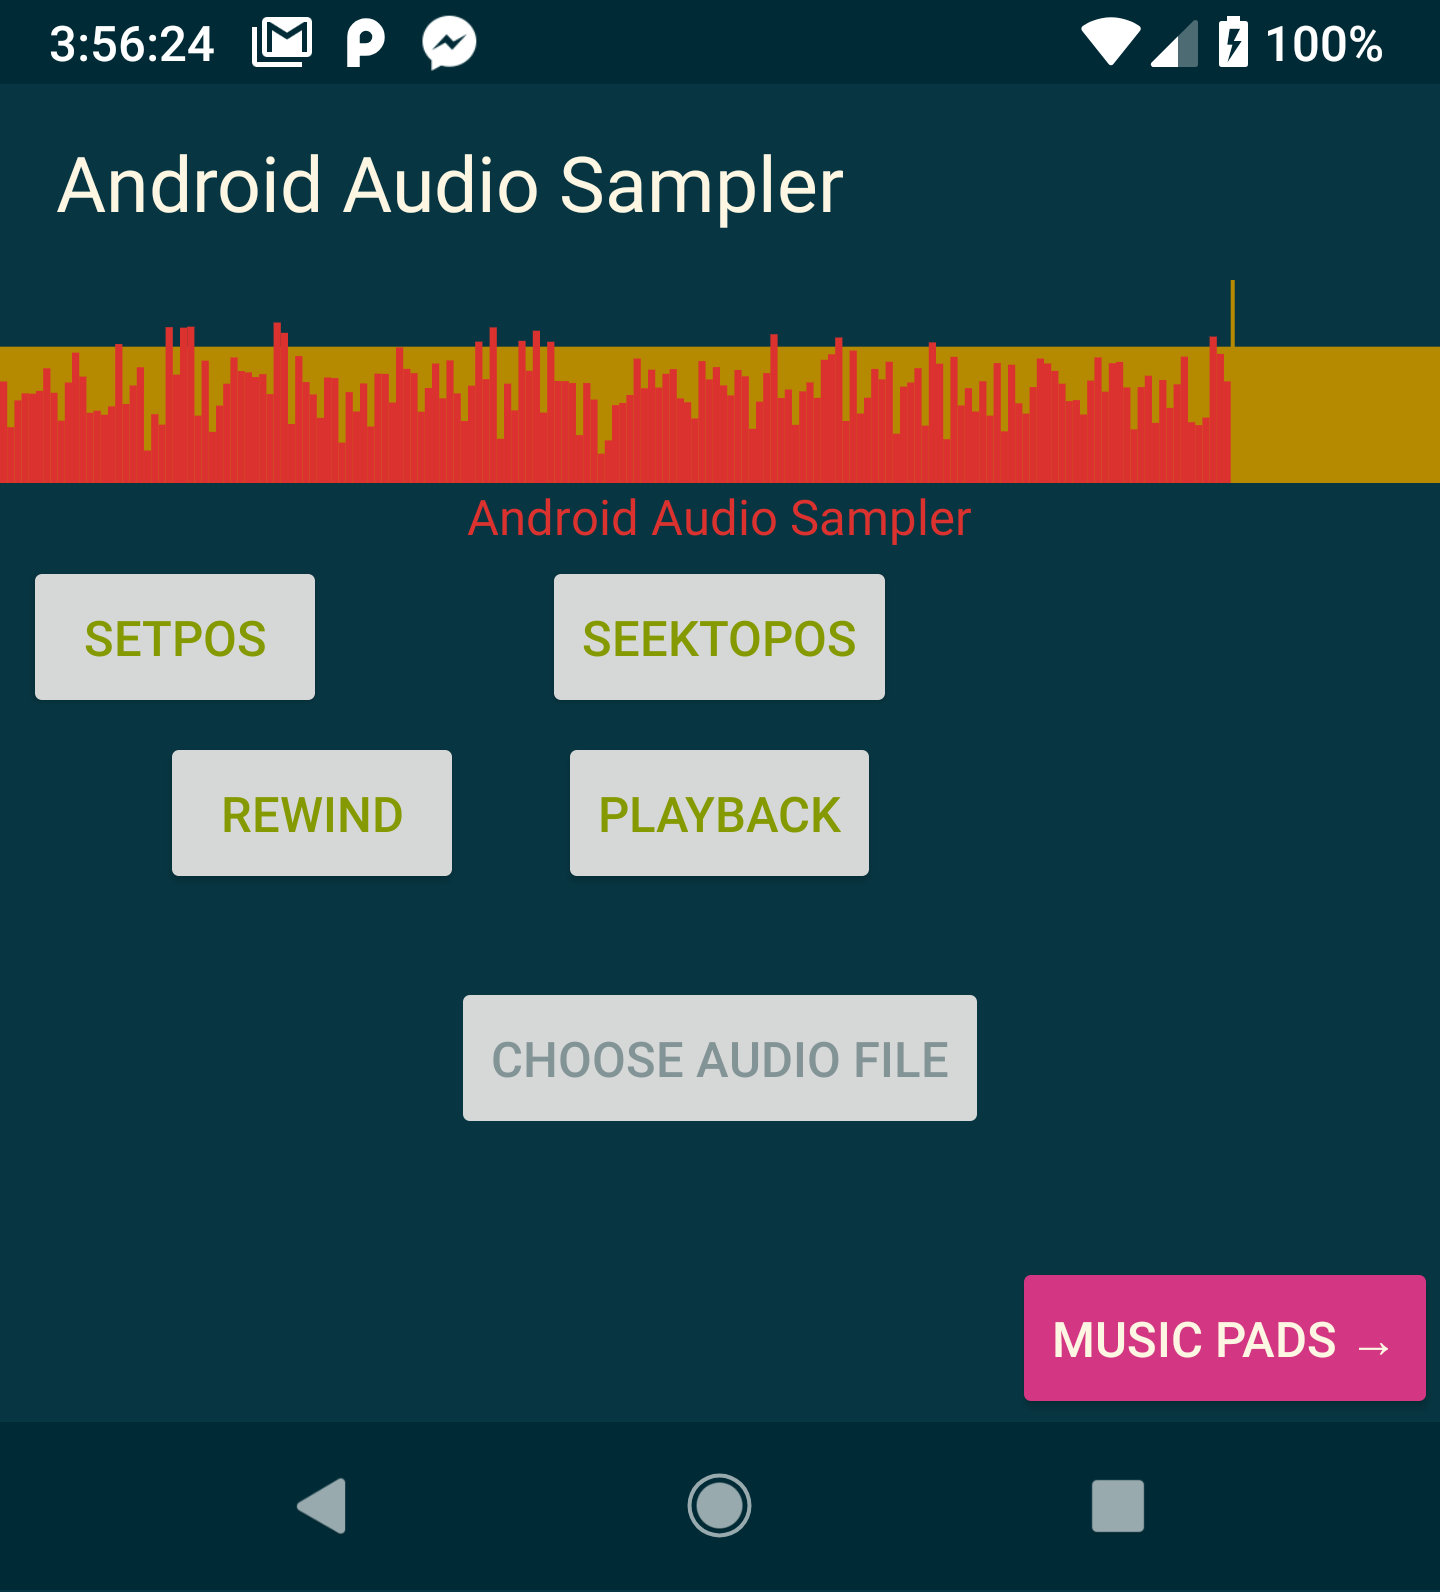 An audio sampler program that I worked on with a few others at HSU built on Android